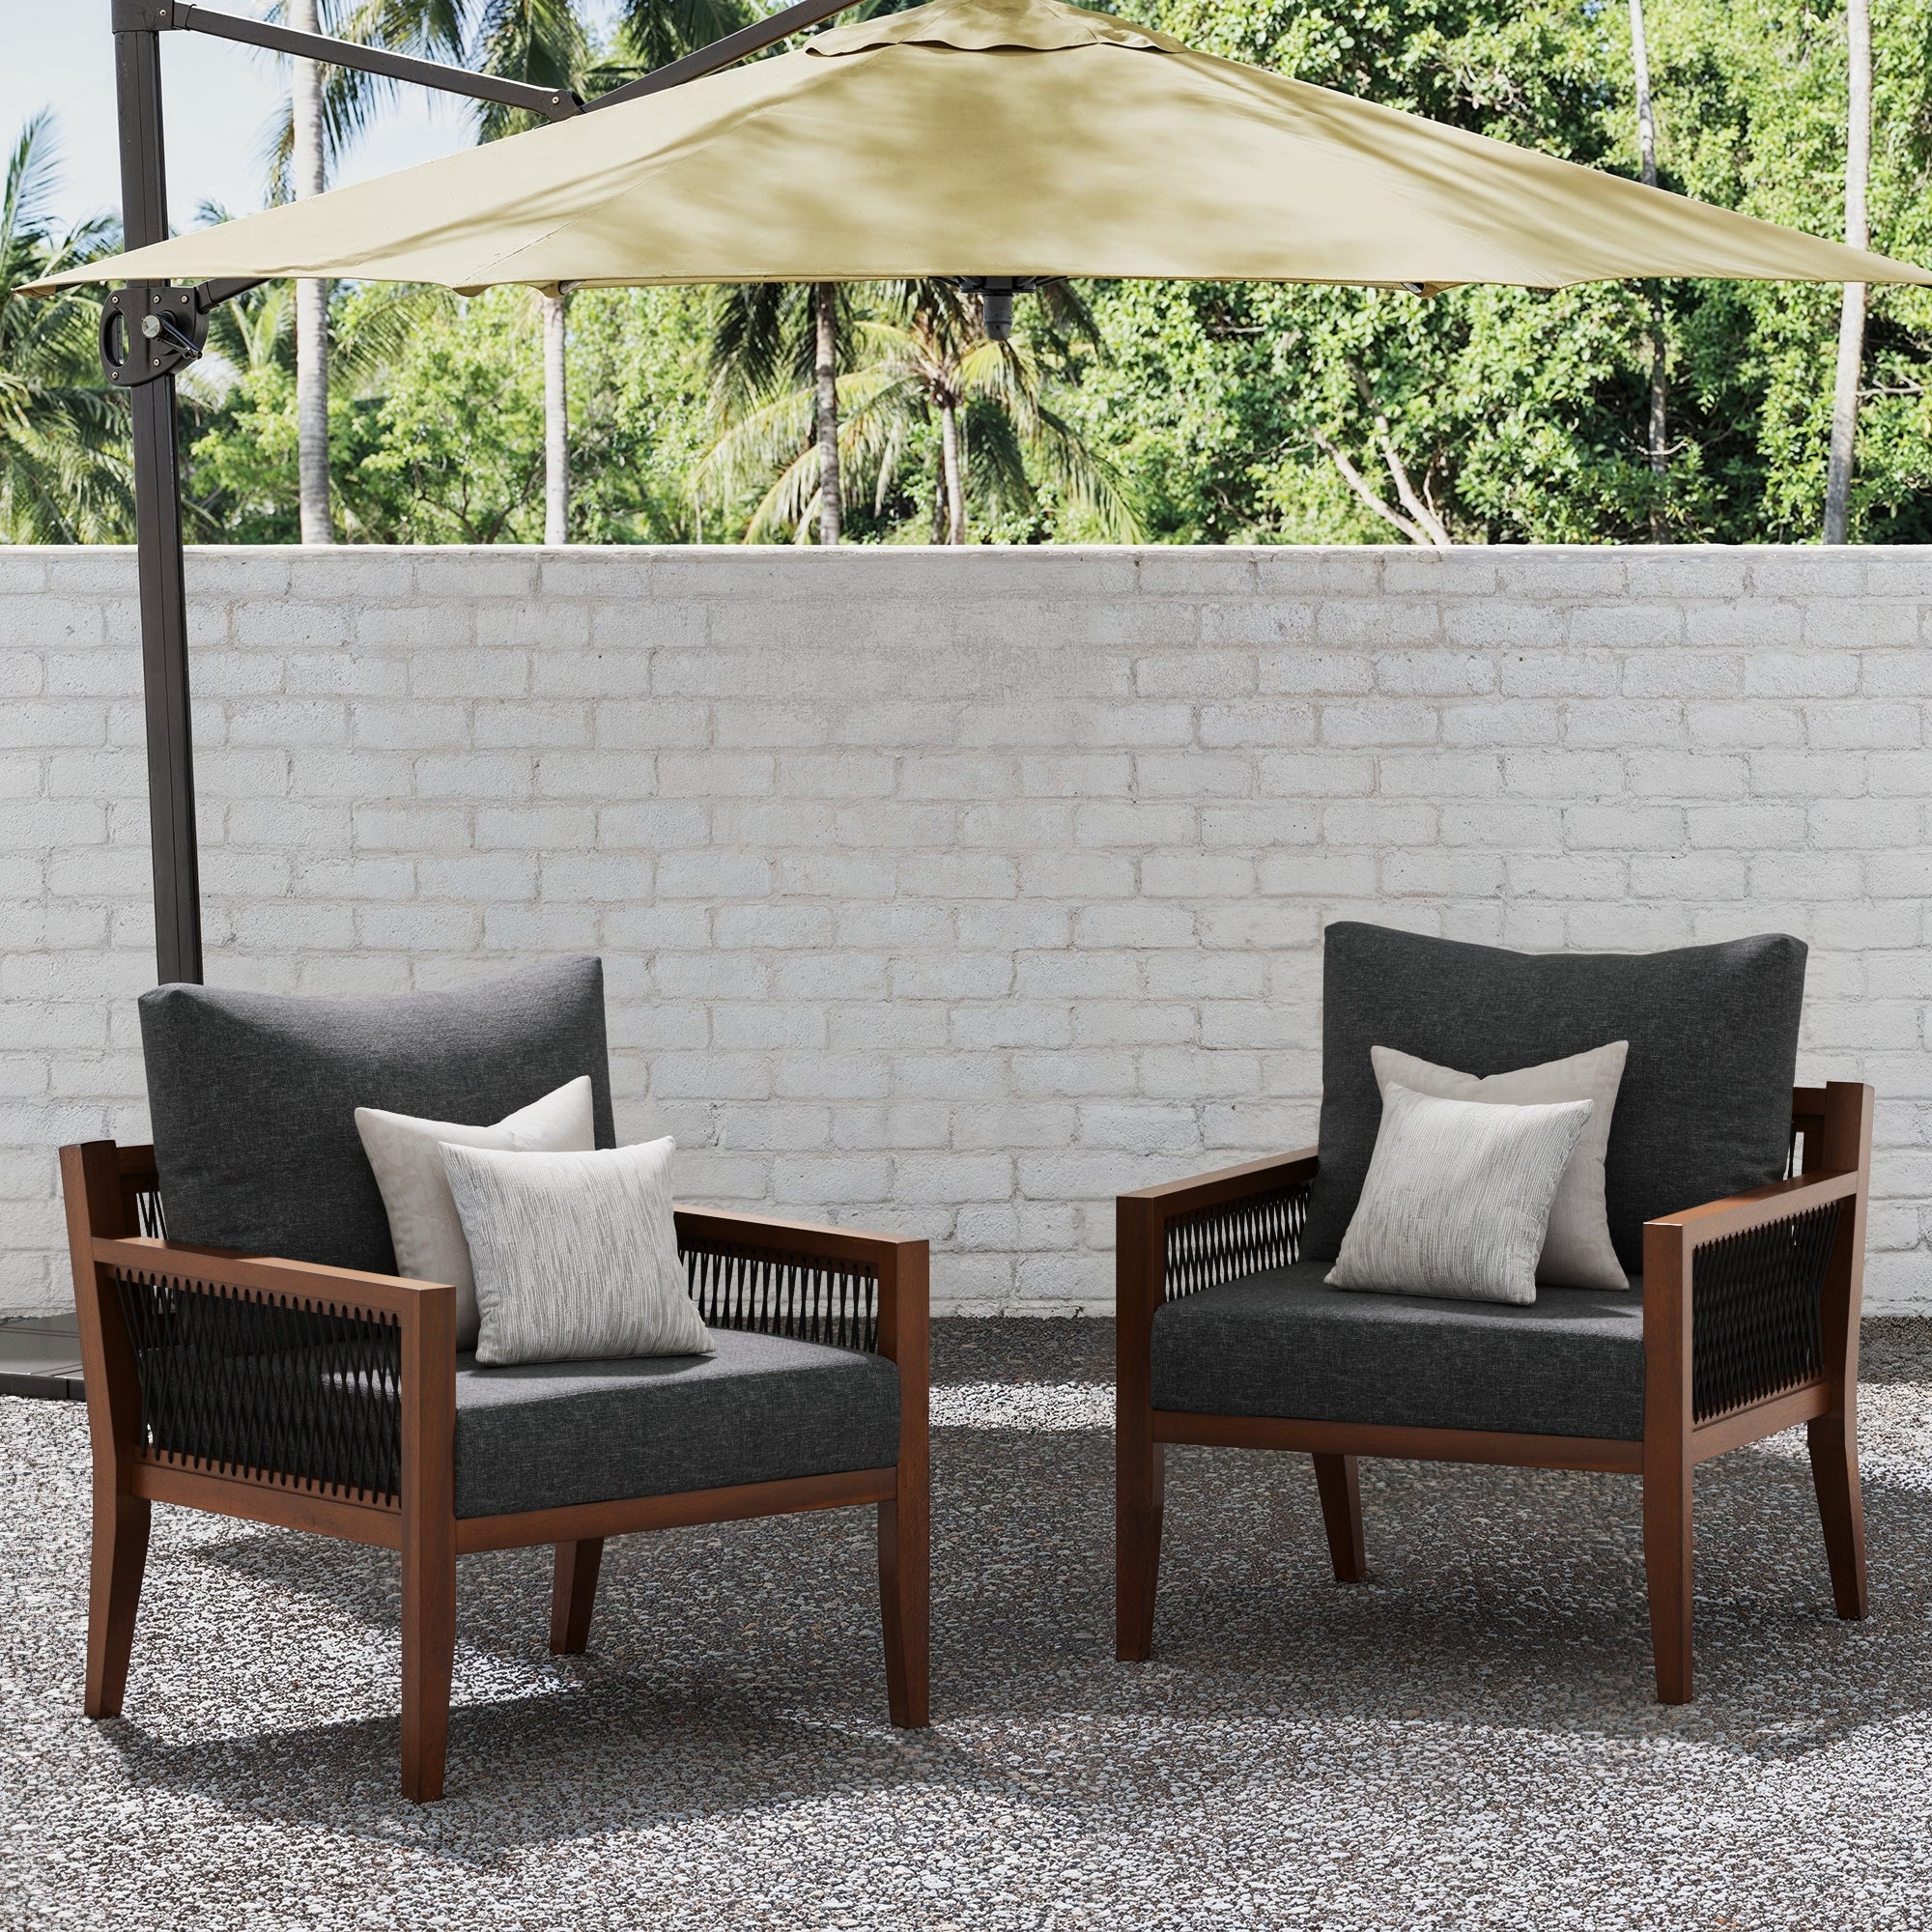 Set of 2 Outdoor Patio Arm Chairs Gray